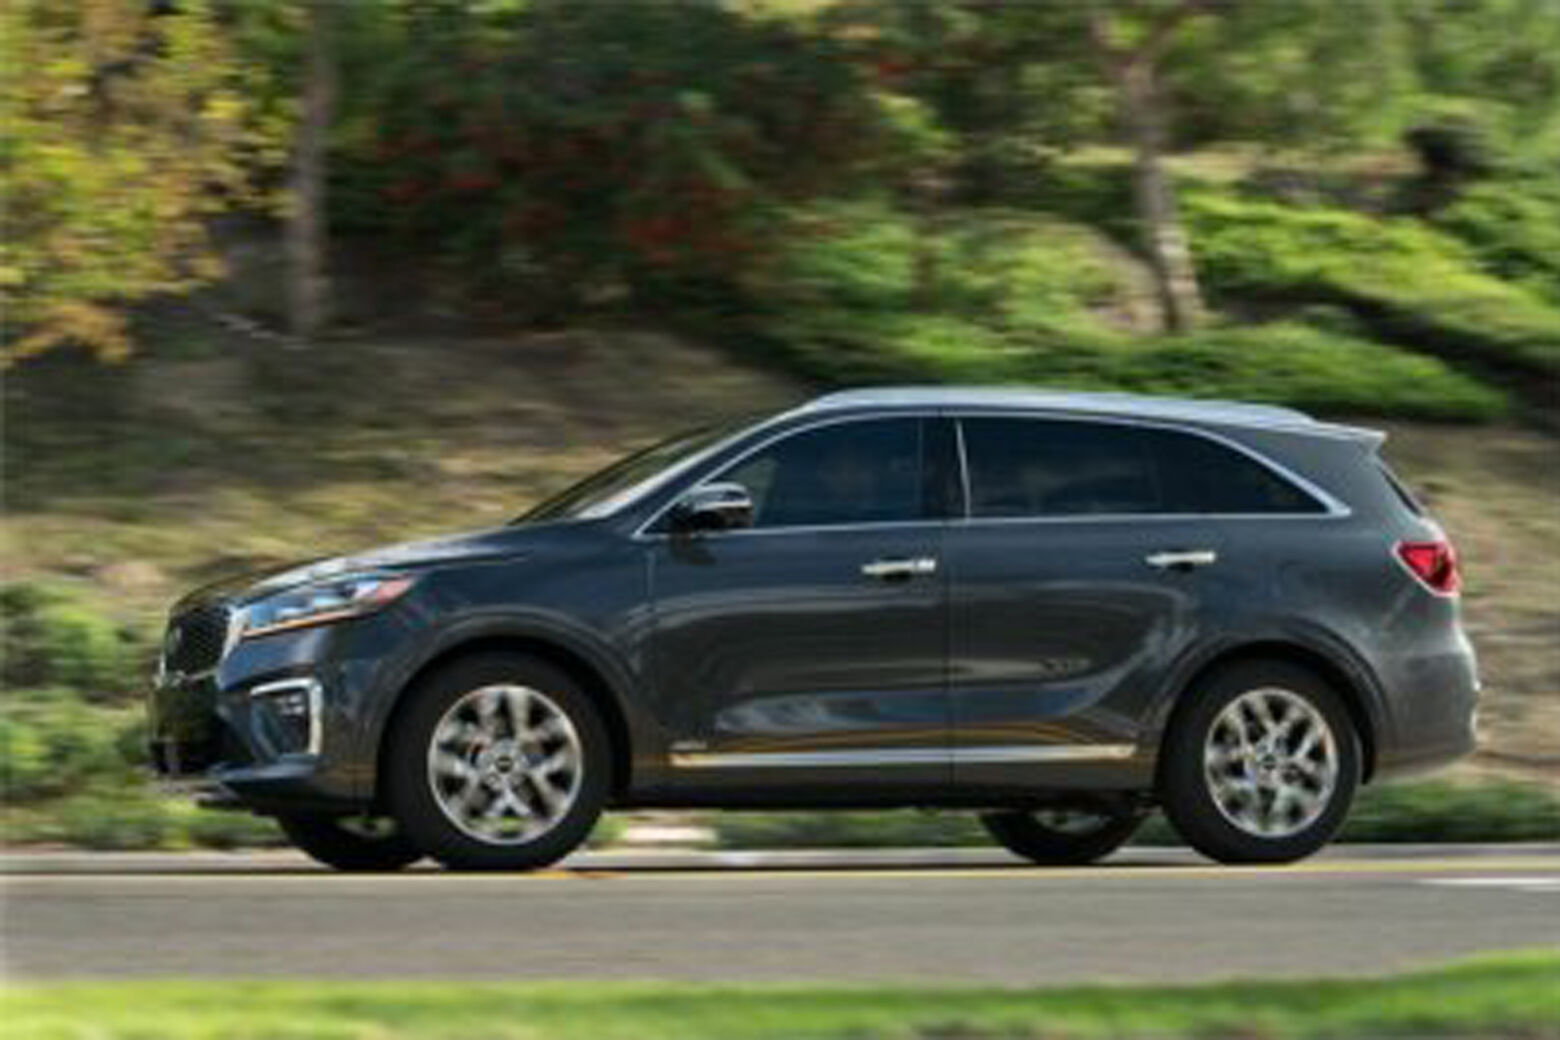 <h3><strong>2020 Kia Sorento</strong></h3>
<p><strong>Purchase Deal: </strong>0% financing for 75 months</p>
